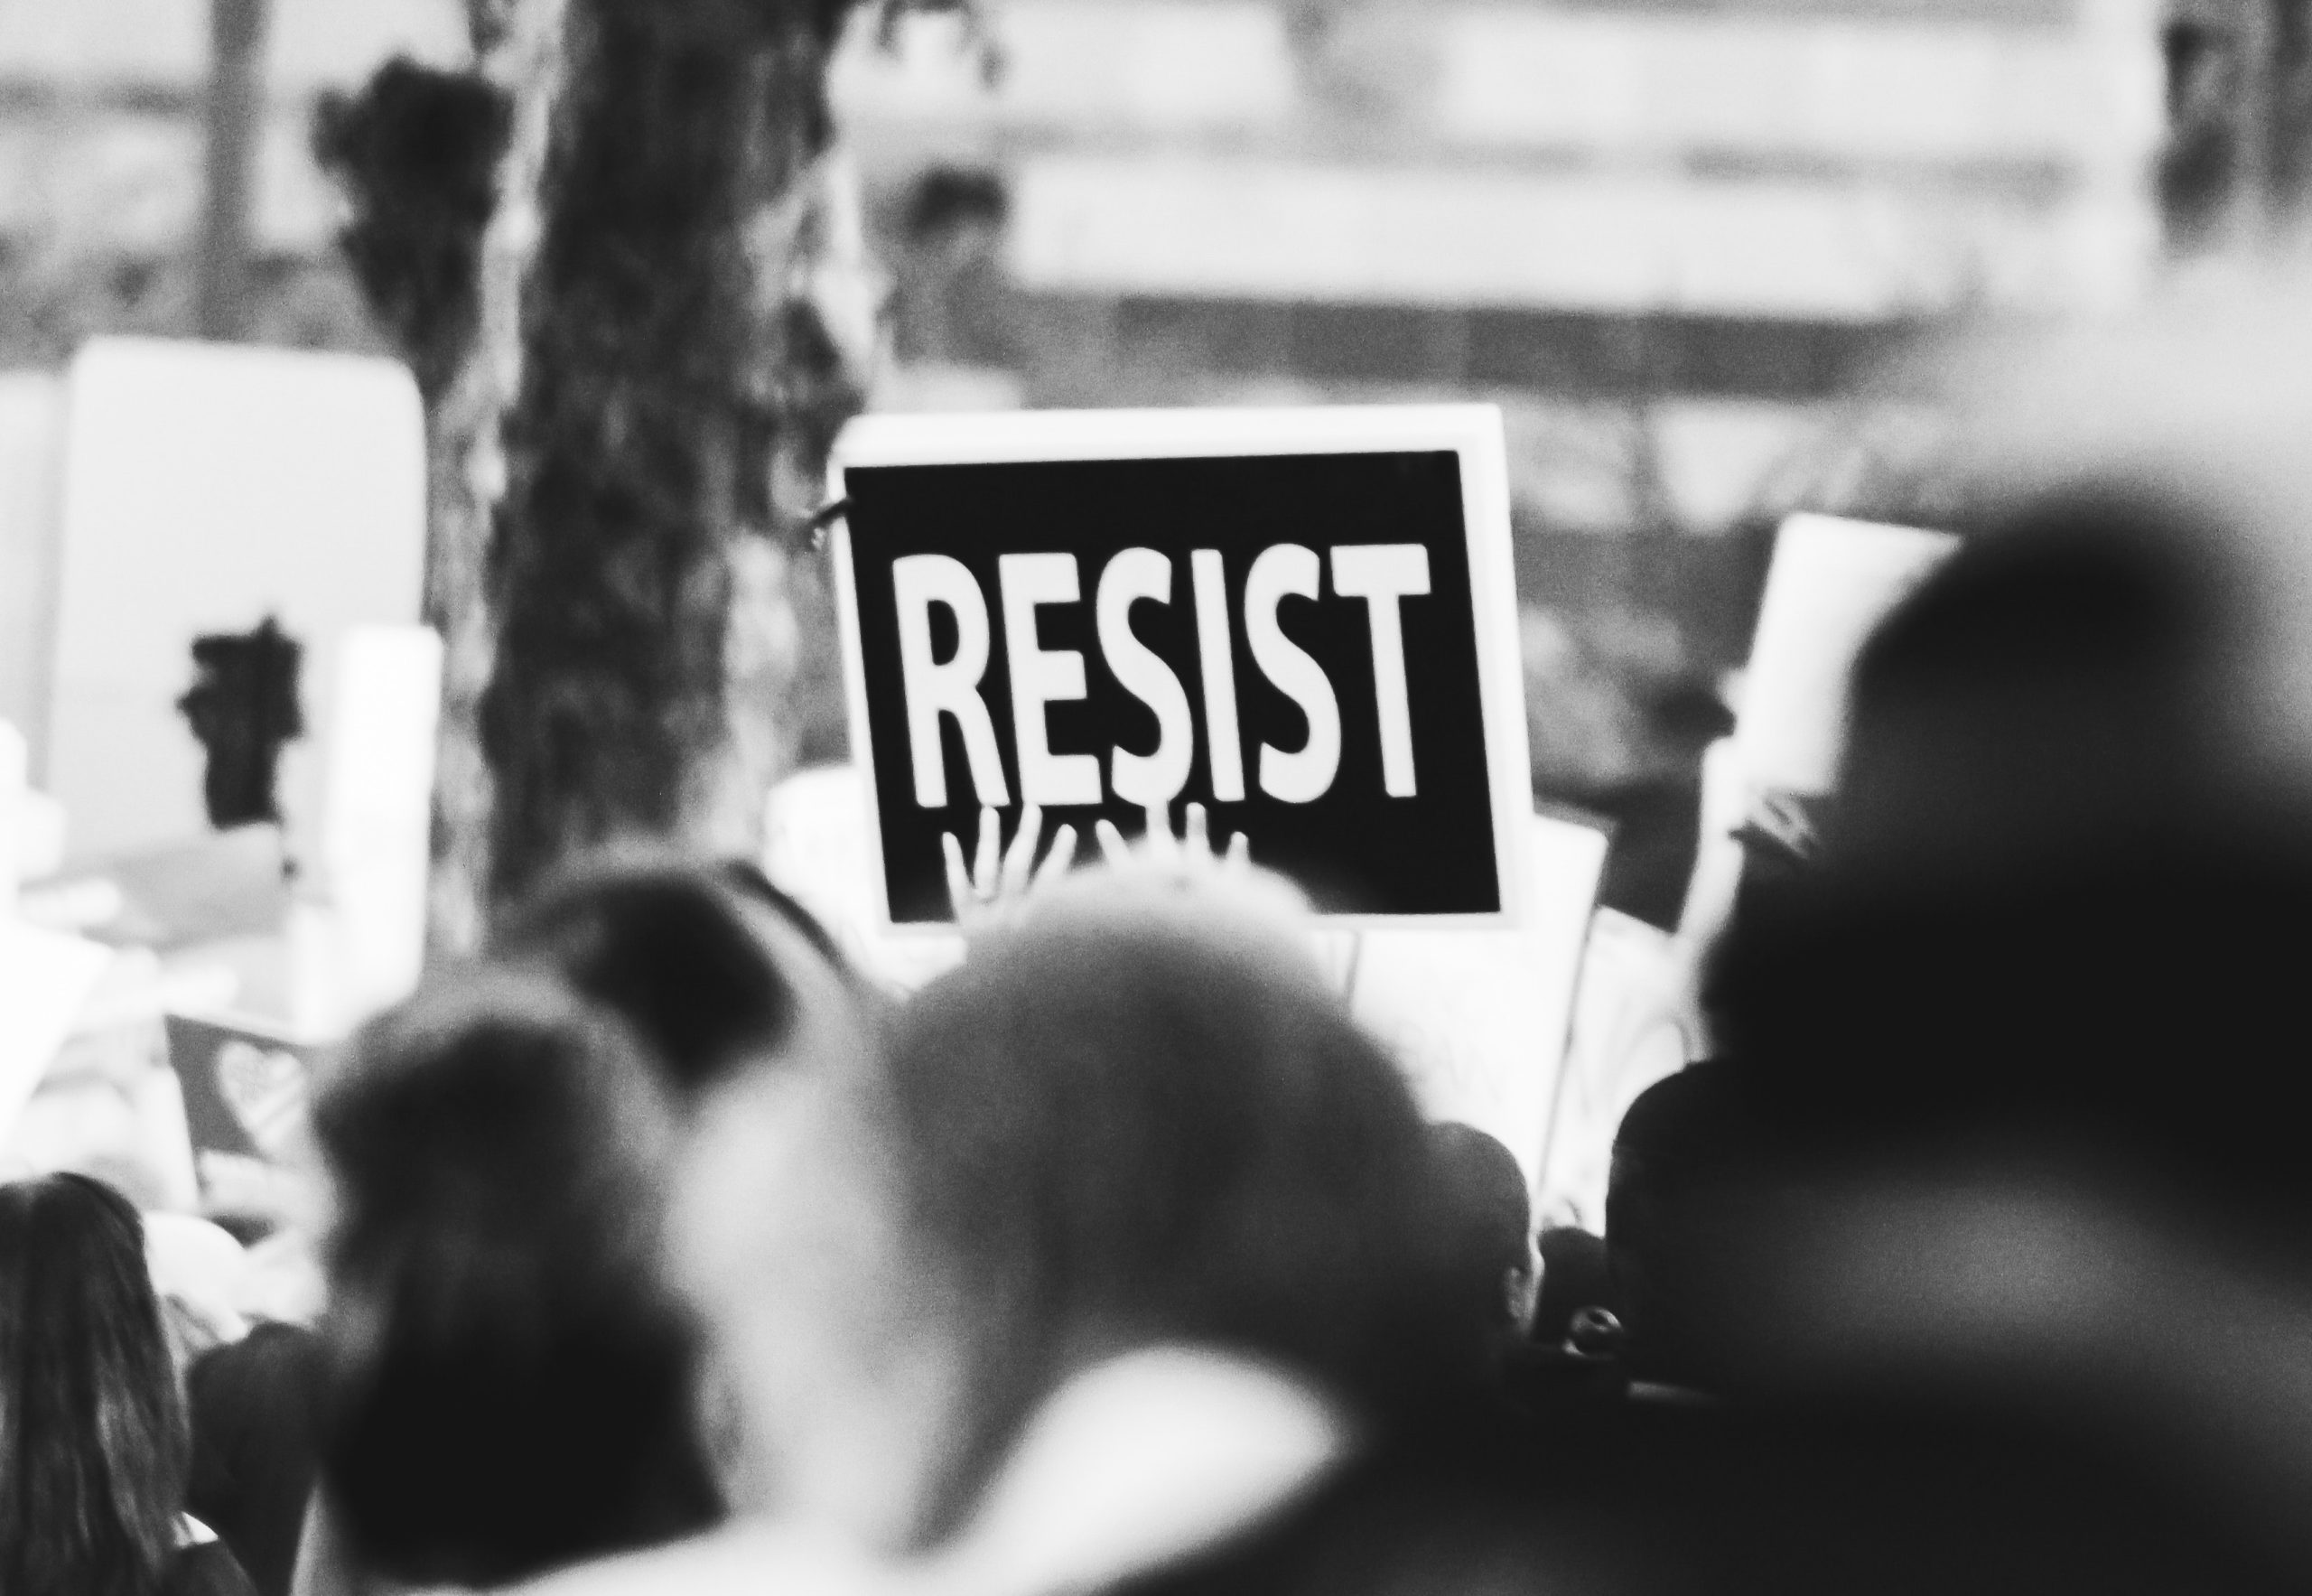 protest sign with the word resist in a crowd of people